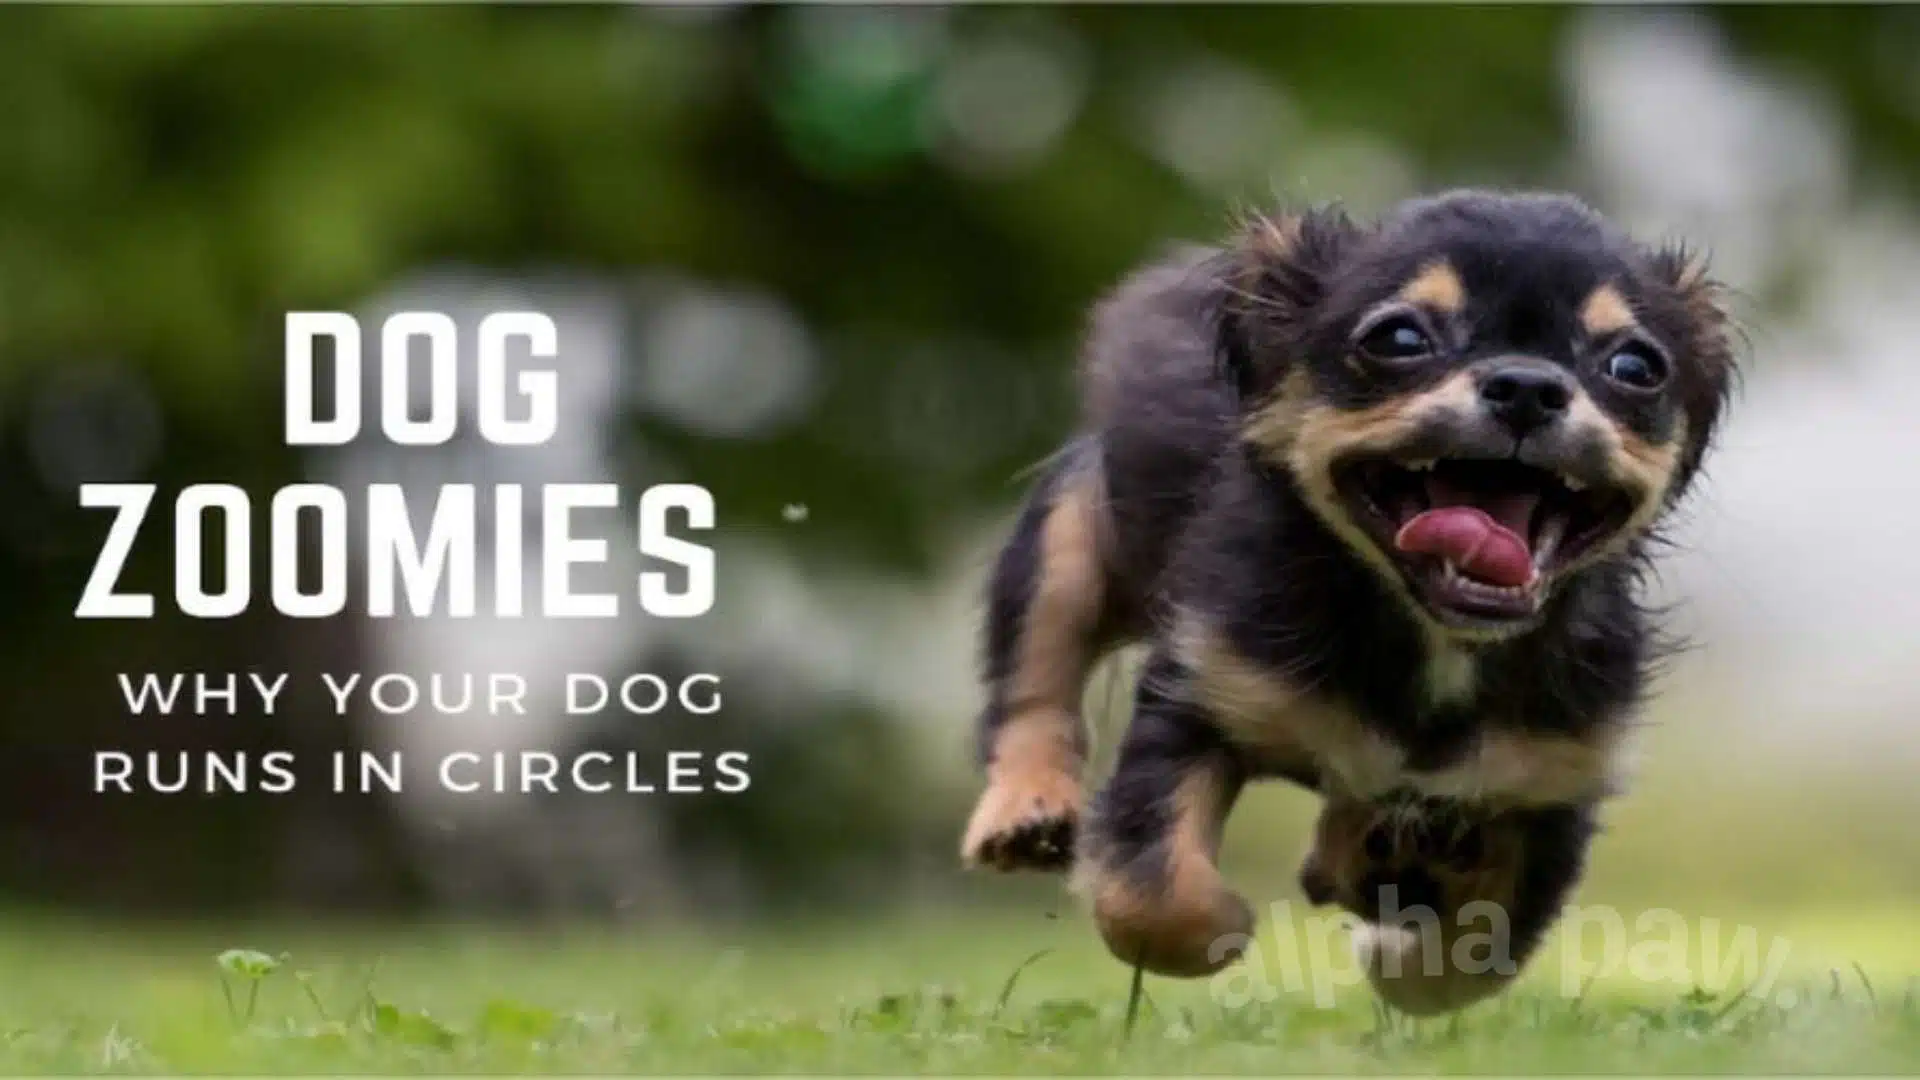 Dog Zoomies: Why Your Dog Runs in Circles (& What to Do)